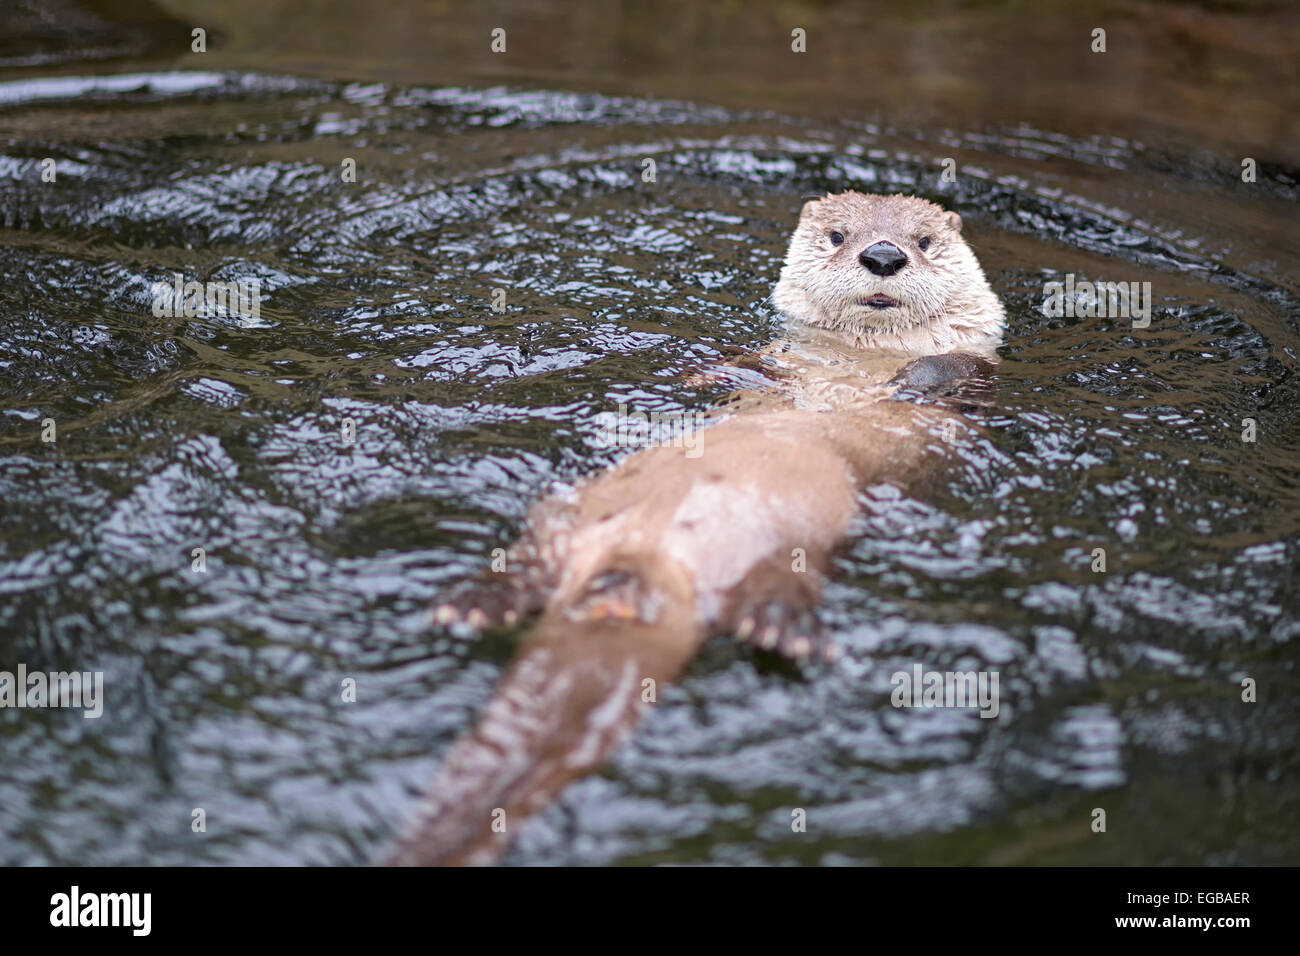 Otter in the water on its back Stock Photo